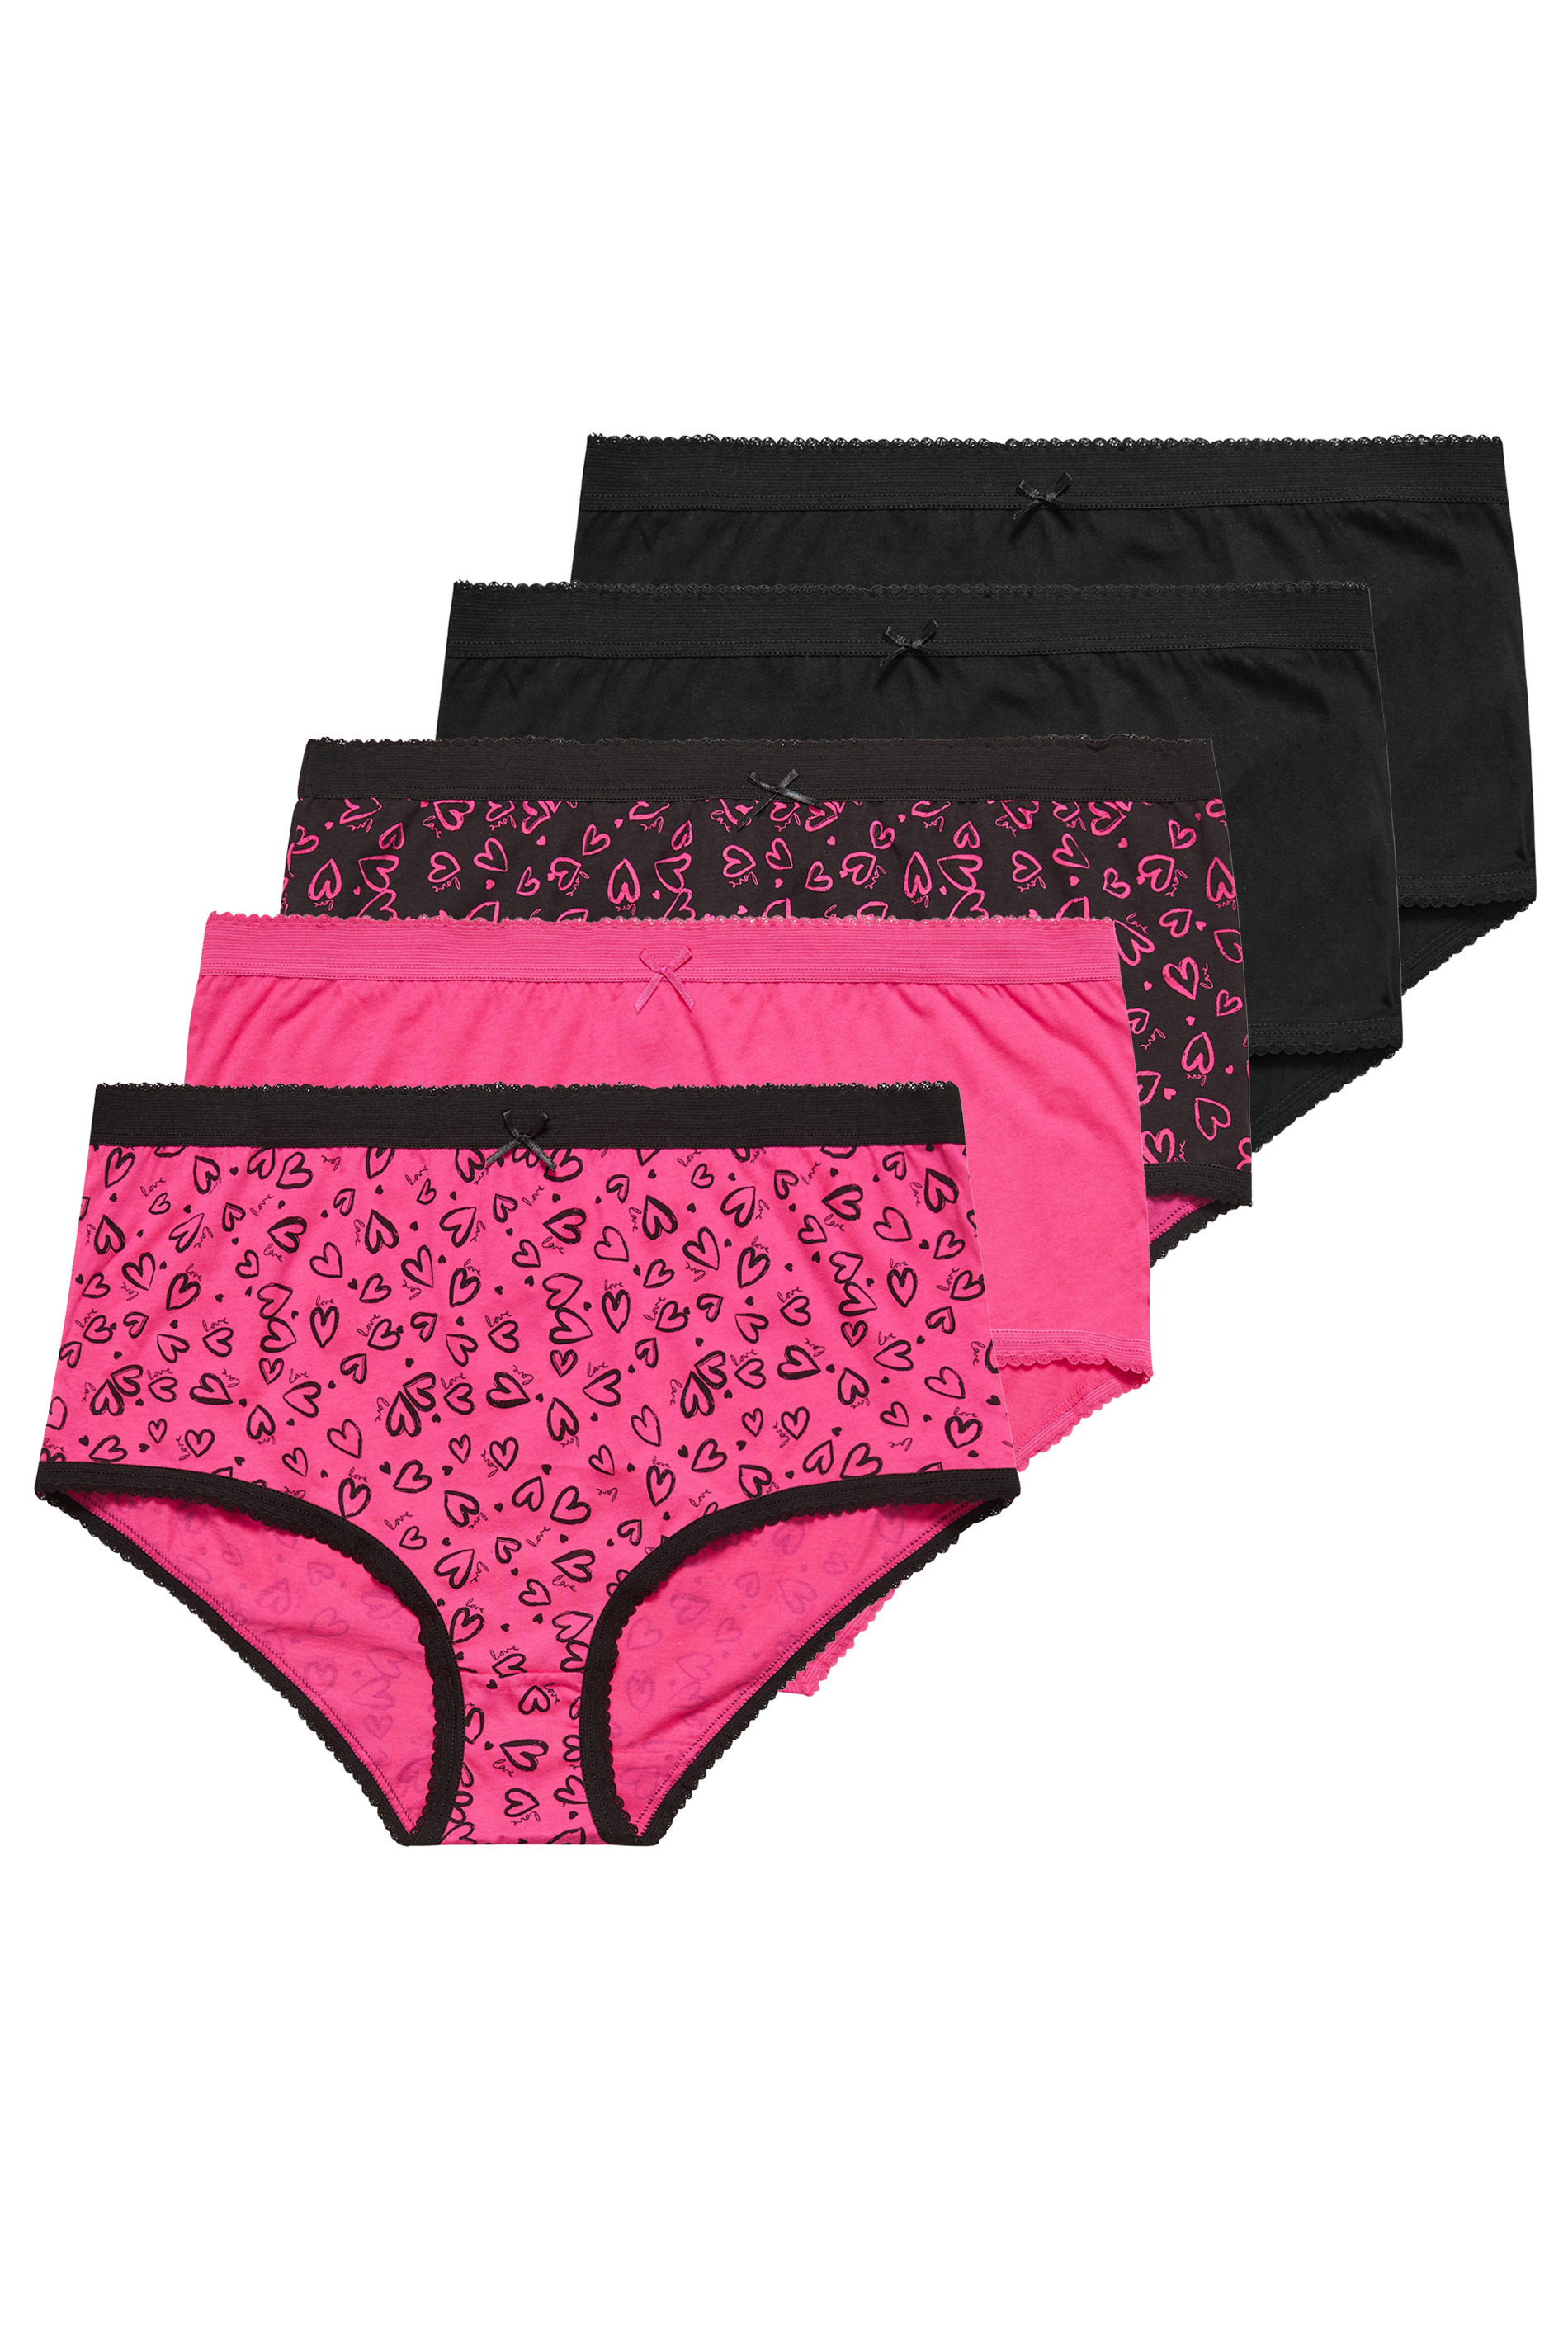 YOURS 5 PACK Plus Size Black & Pink Heart Design High Waisted Full Briefs | Yours Clothing 3